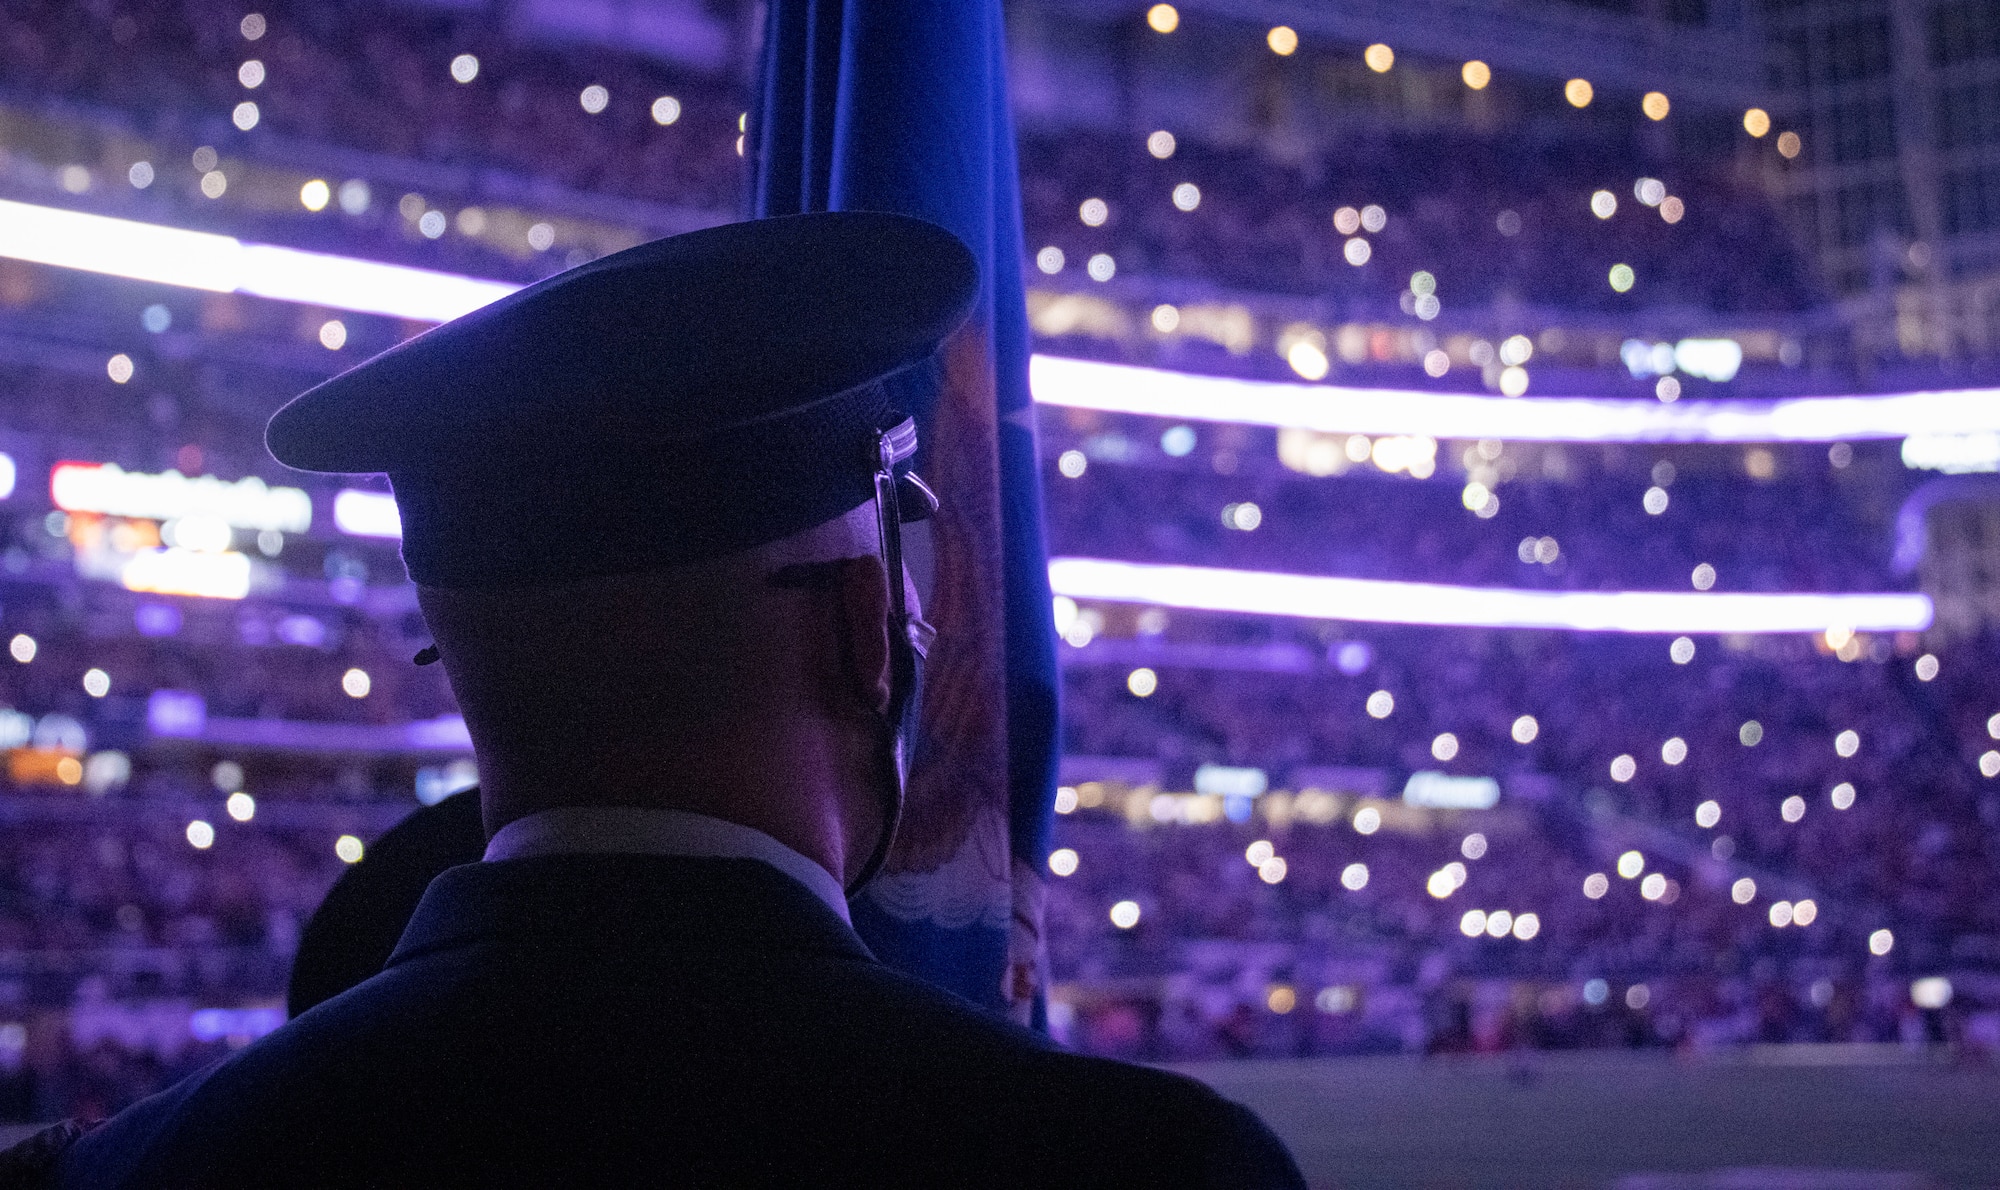 One honor guardsman stands in front of an empty stadium